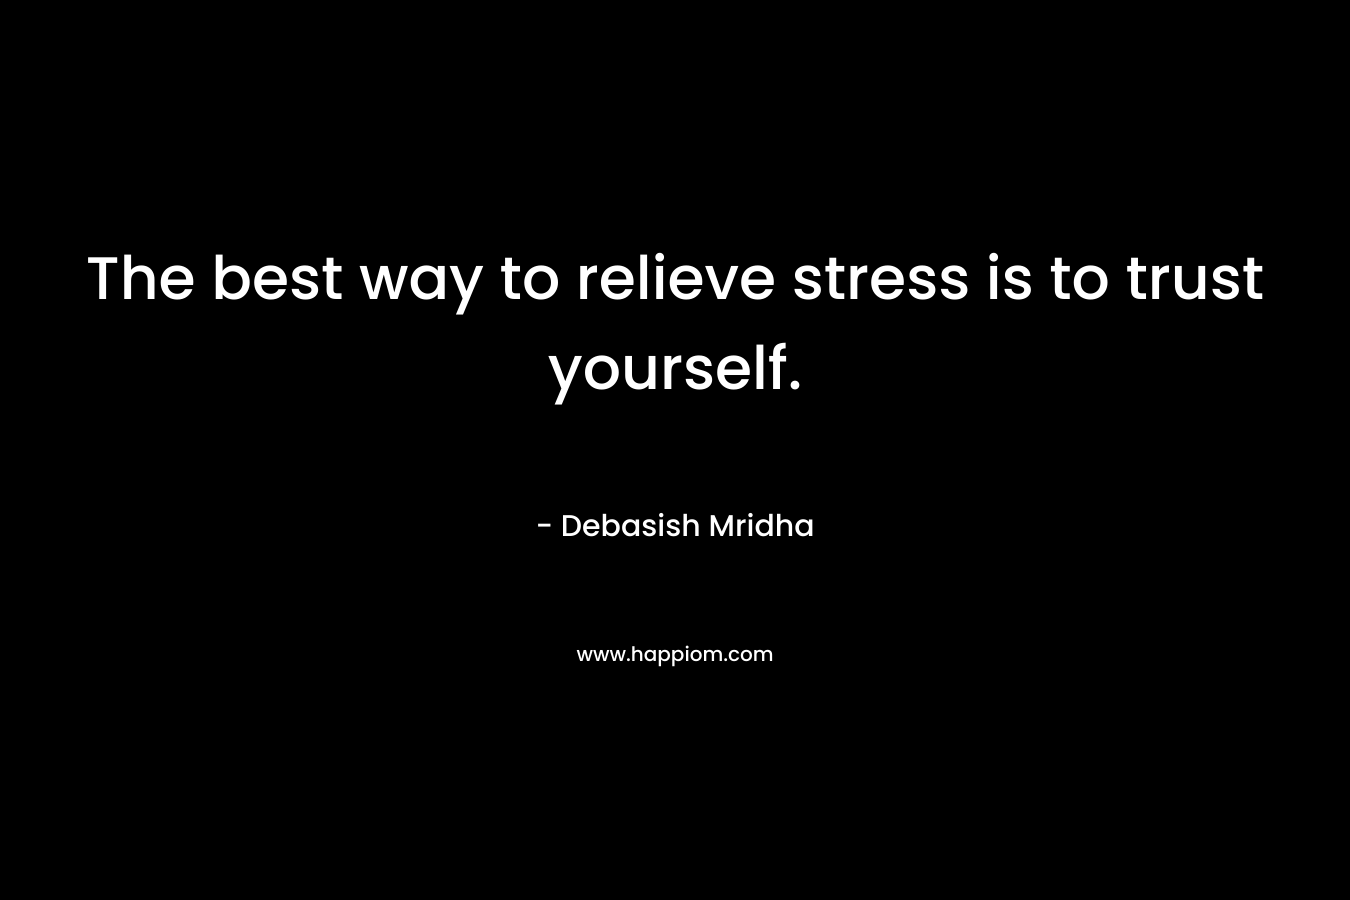 The best way to relieve stress is to trust yourself.